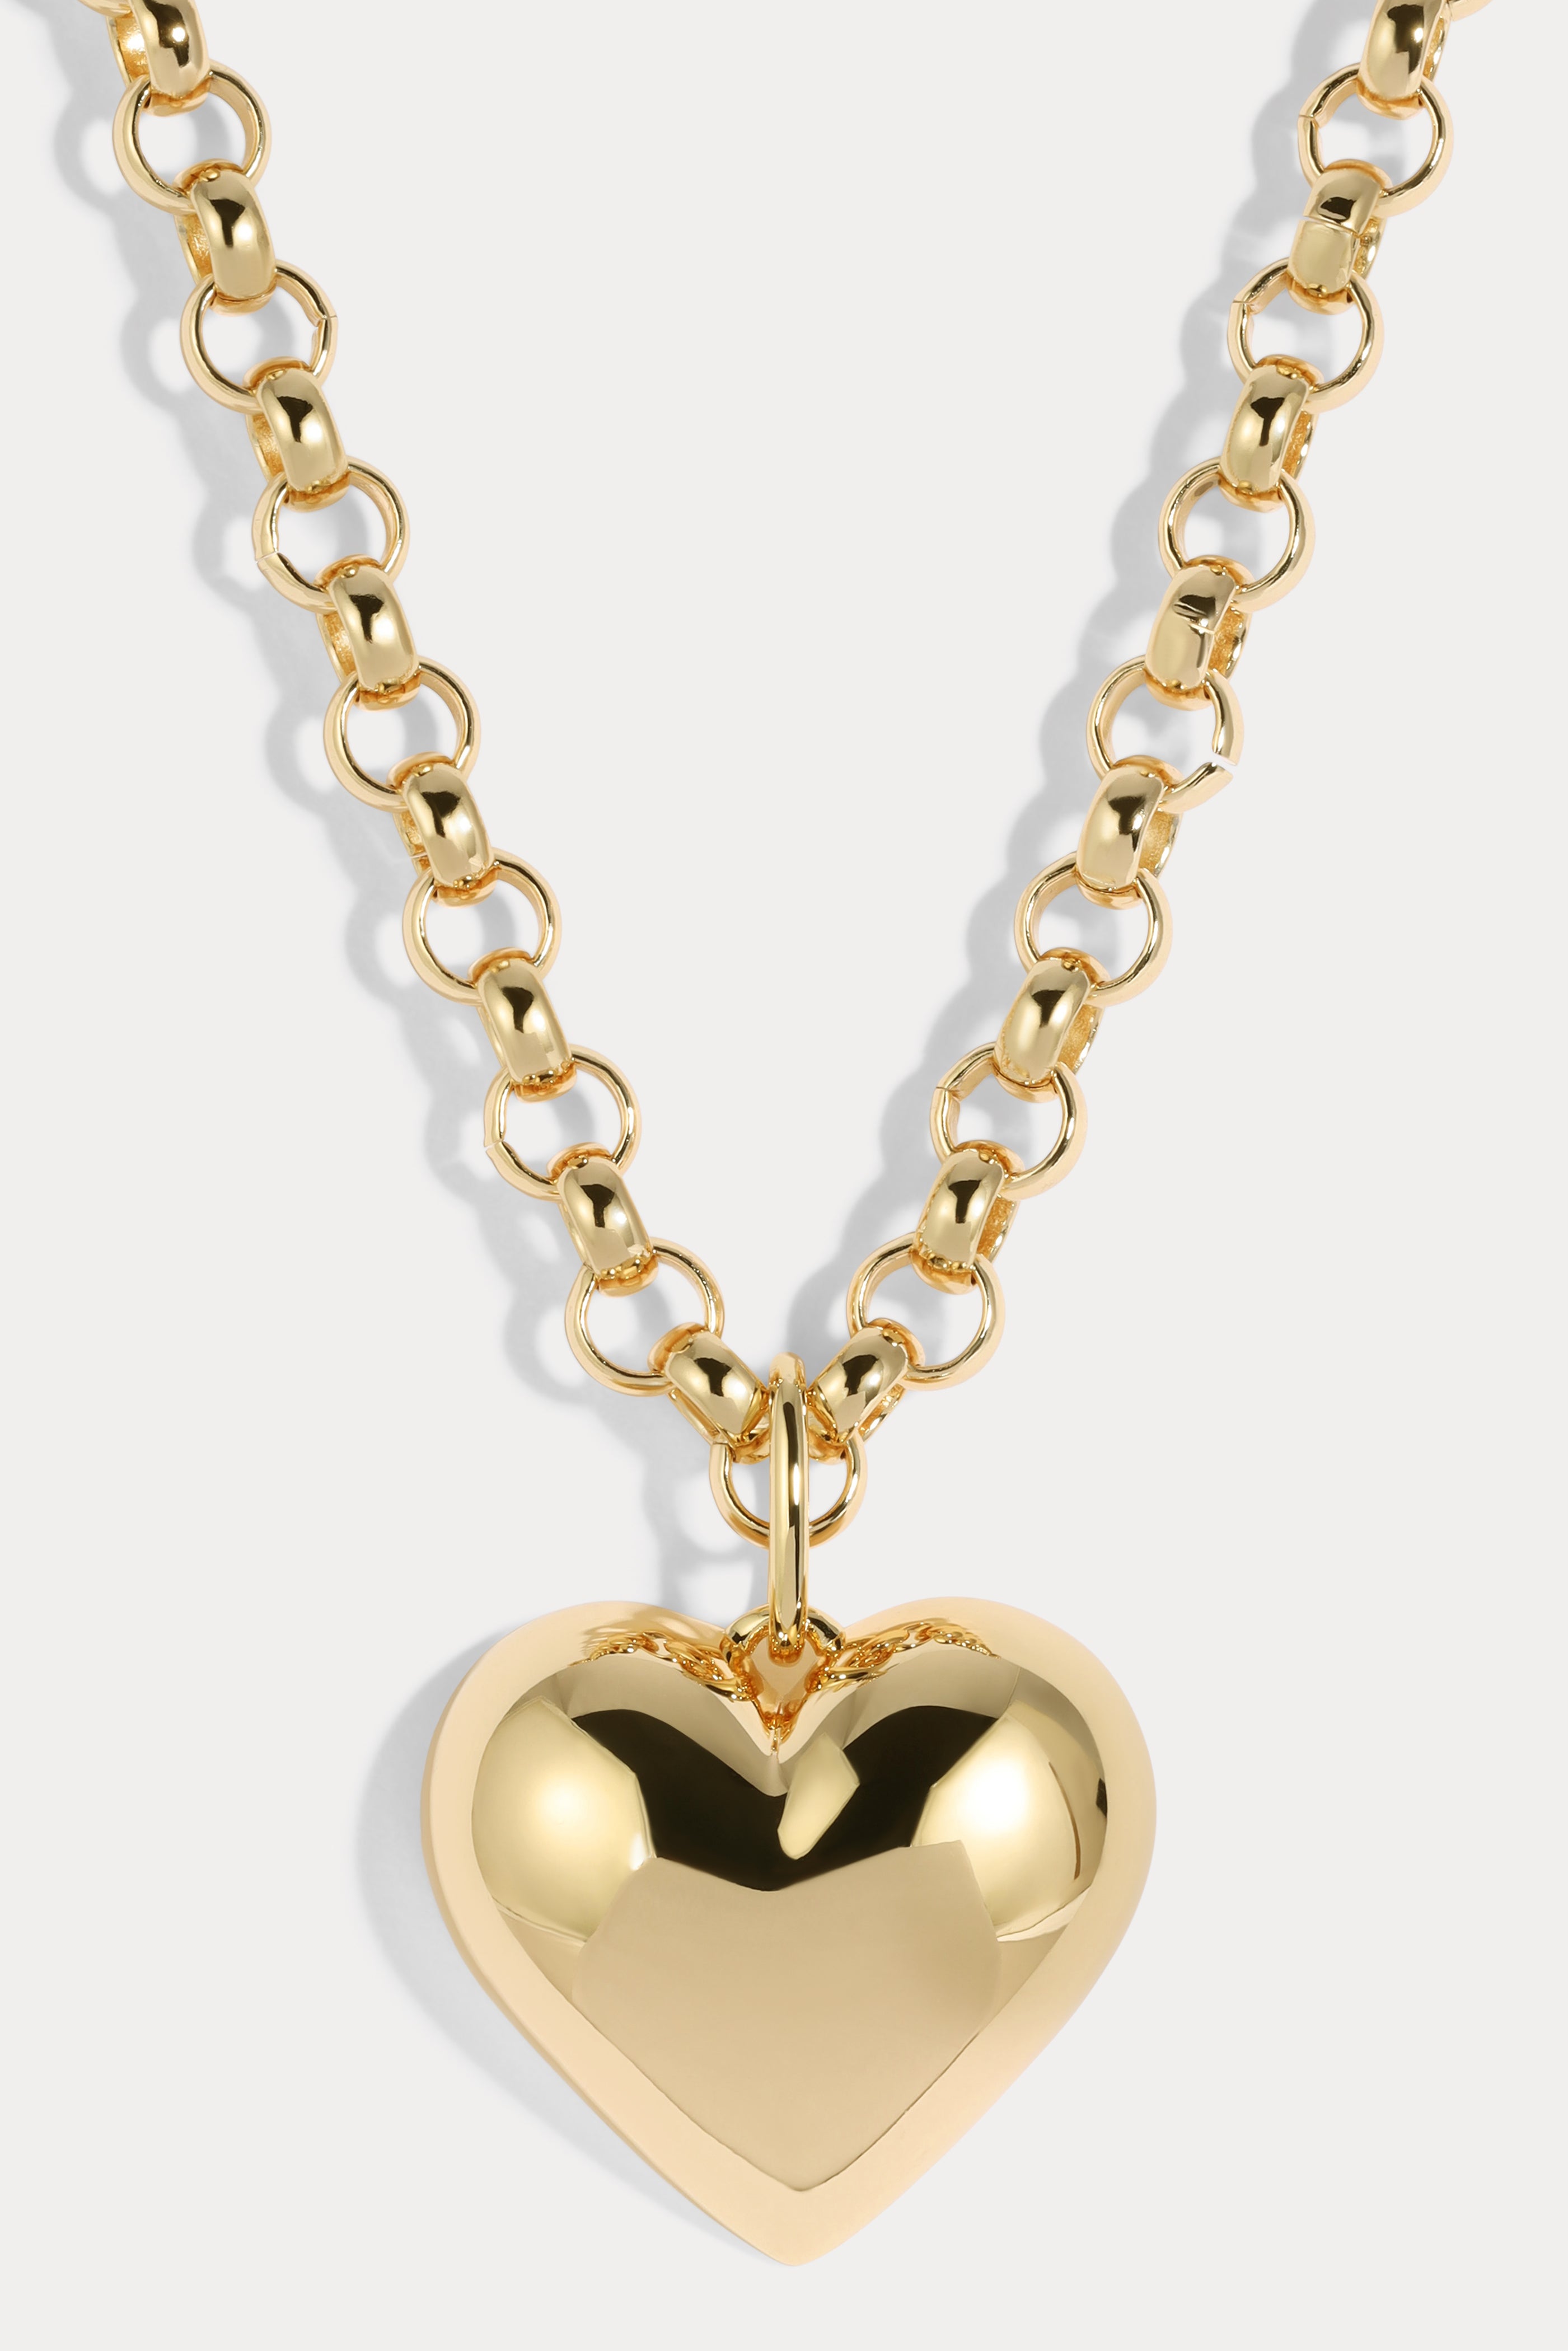 14kt Yellow Gold Heart Necklace | Costco